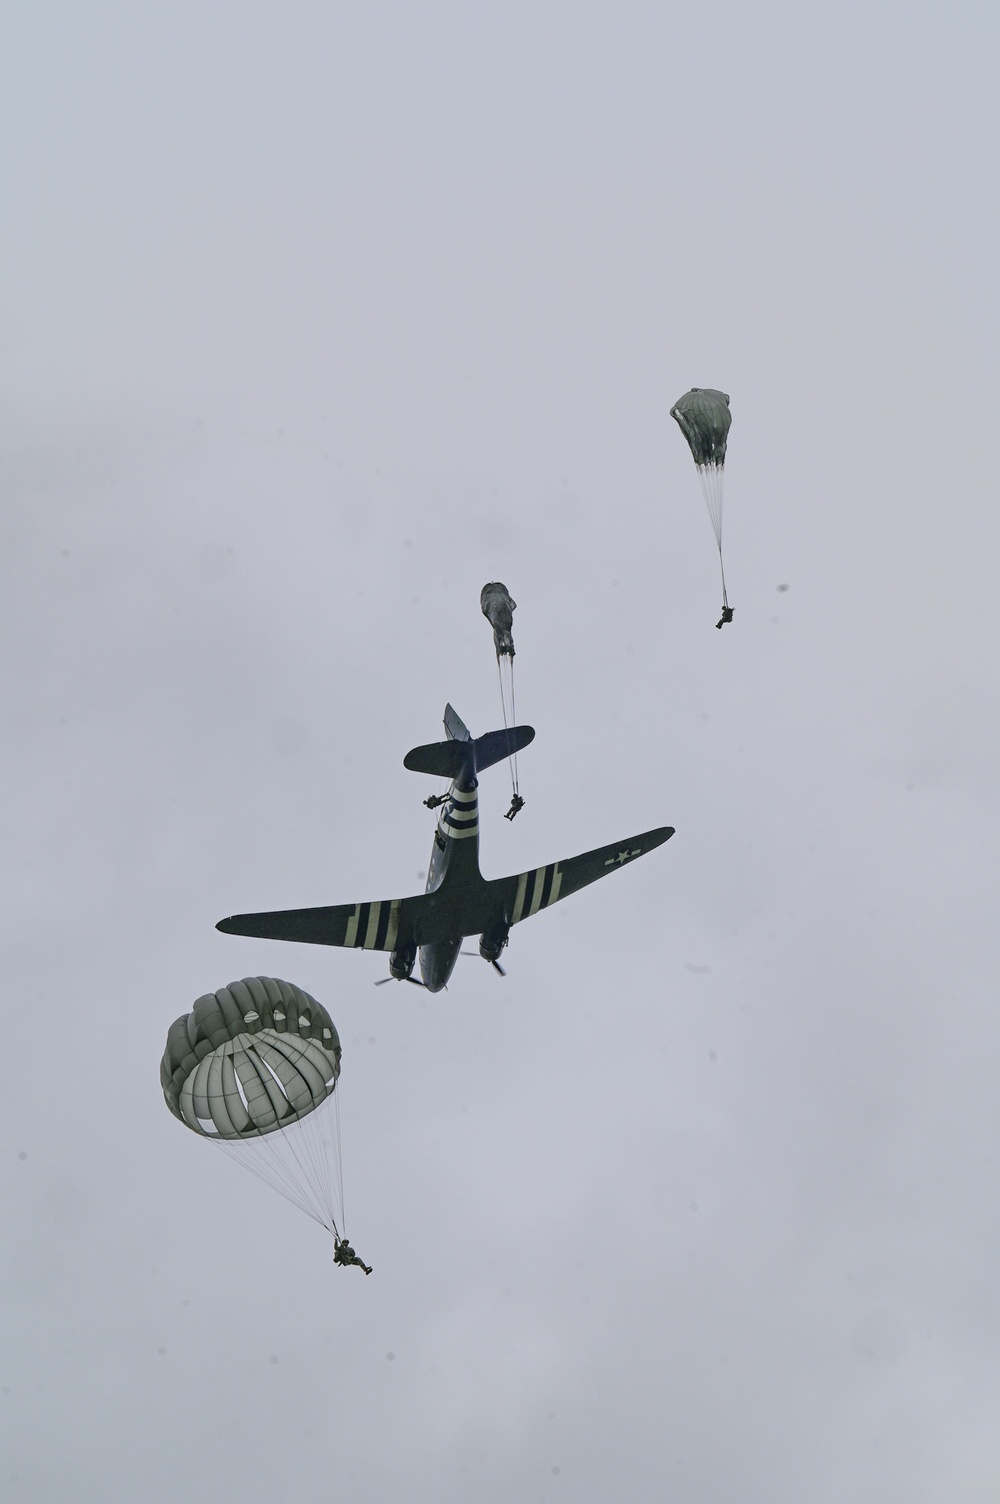 SOCEUR paratroopers participate in the 75th Anniversary of the Berlin Airlift